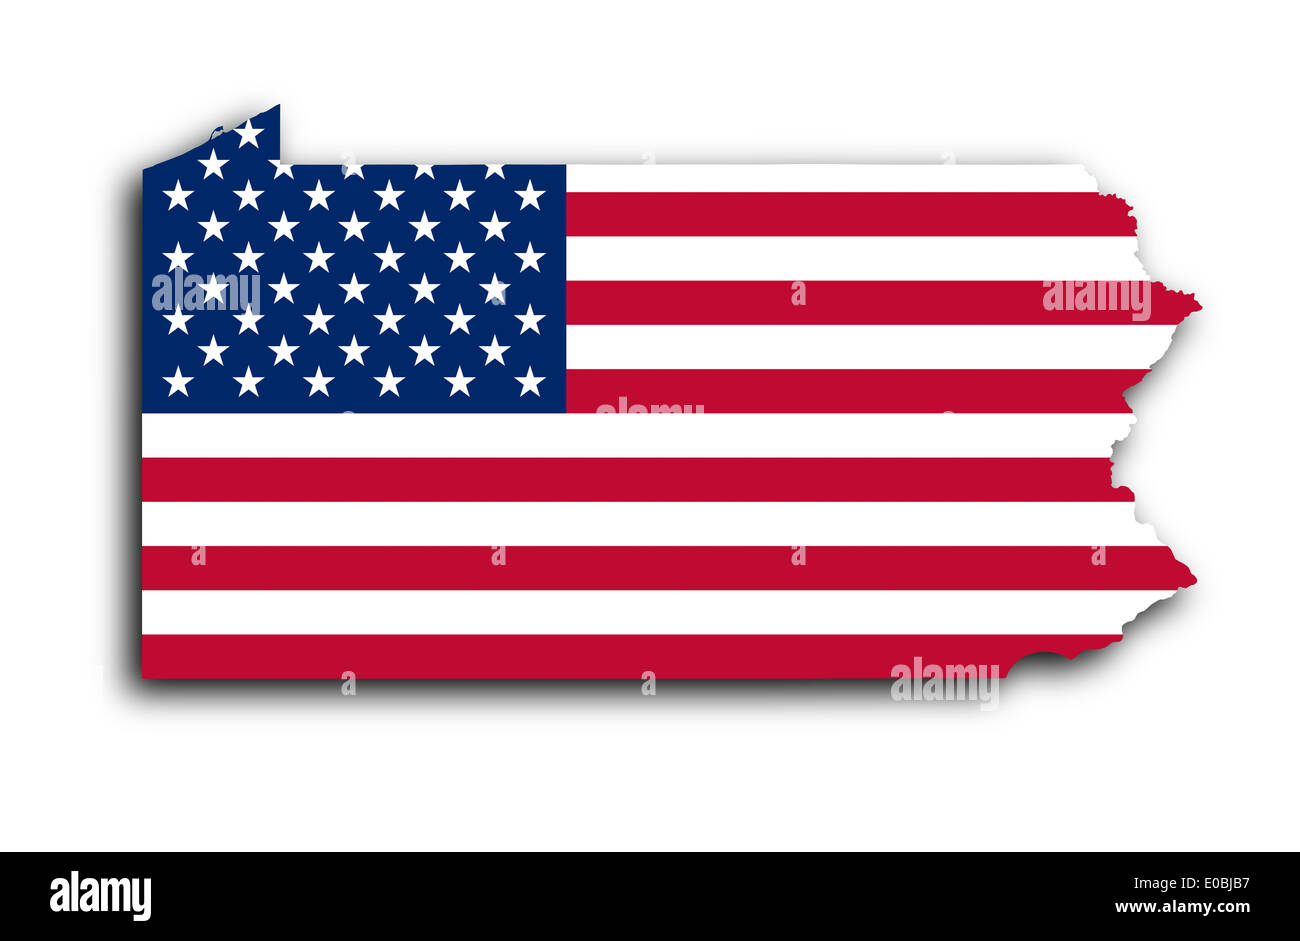 Map Of Nebraska Filled With The National Flag Stock Photo Alamy